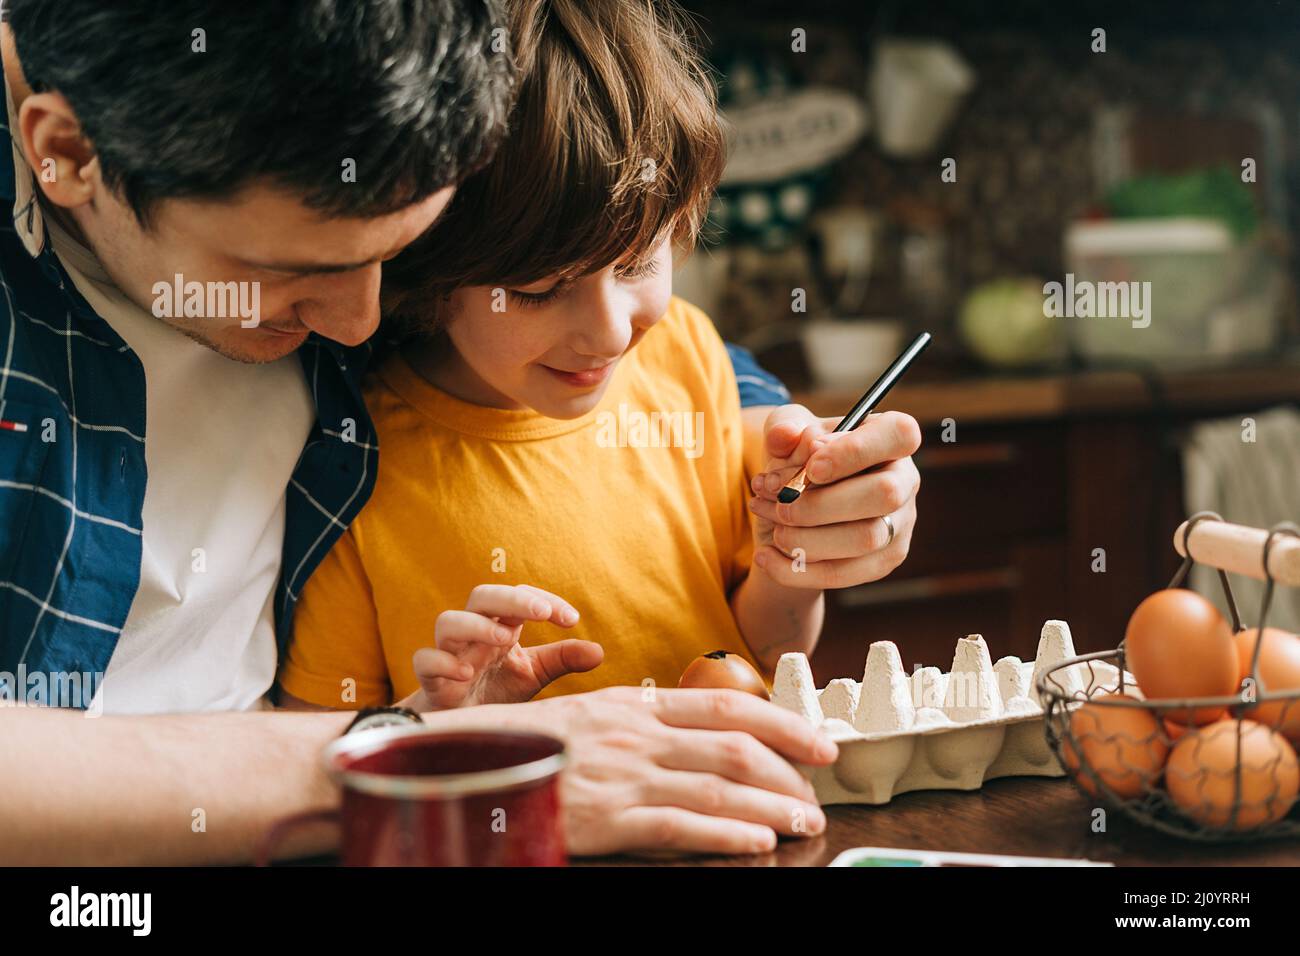 Easter day. Male Father and son painting eggs on wooden background. Family sitting in a kitchen. Preparing for Easter, creative homemade decoration Stock Photo